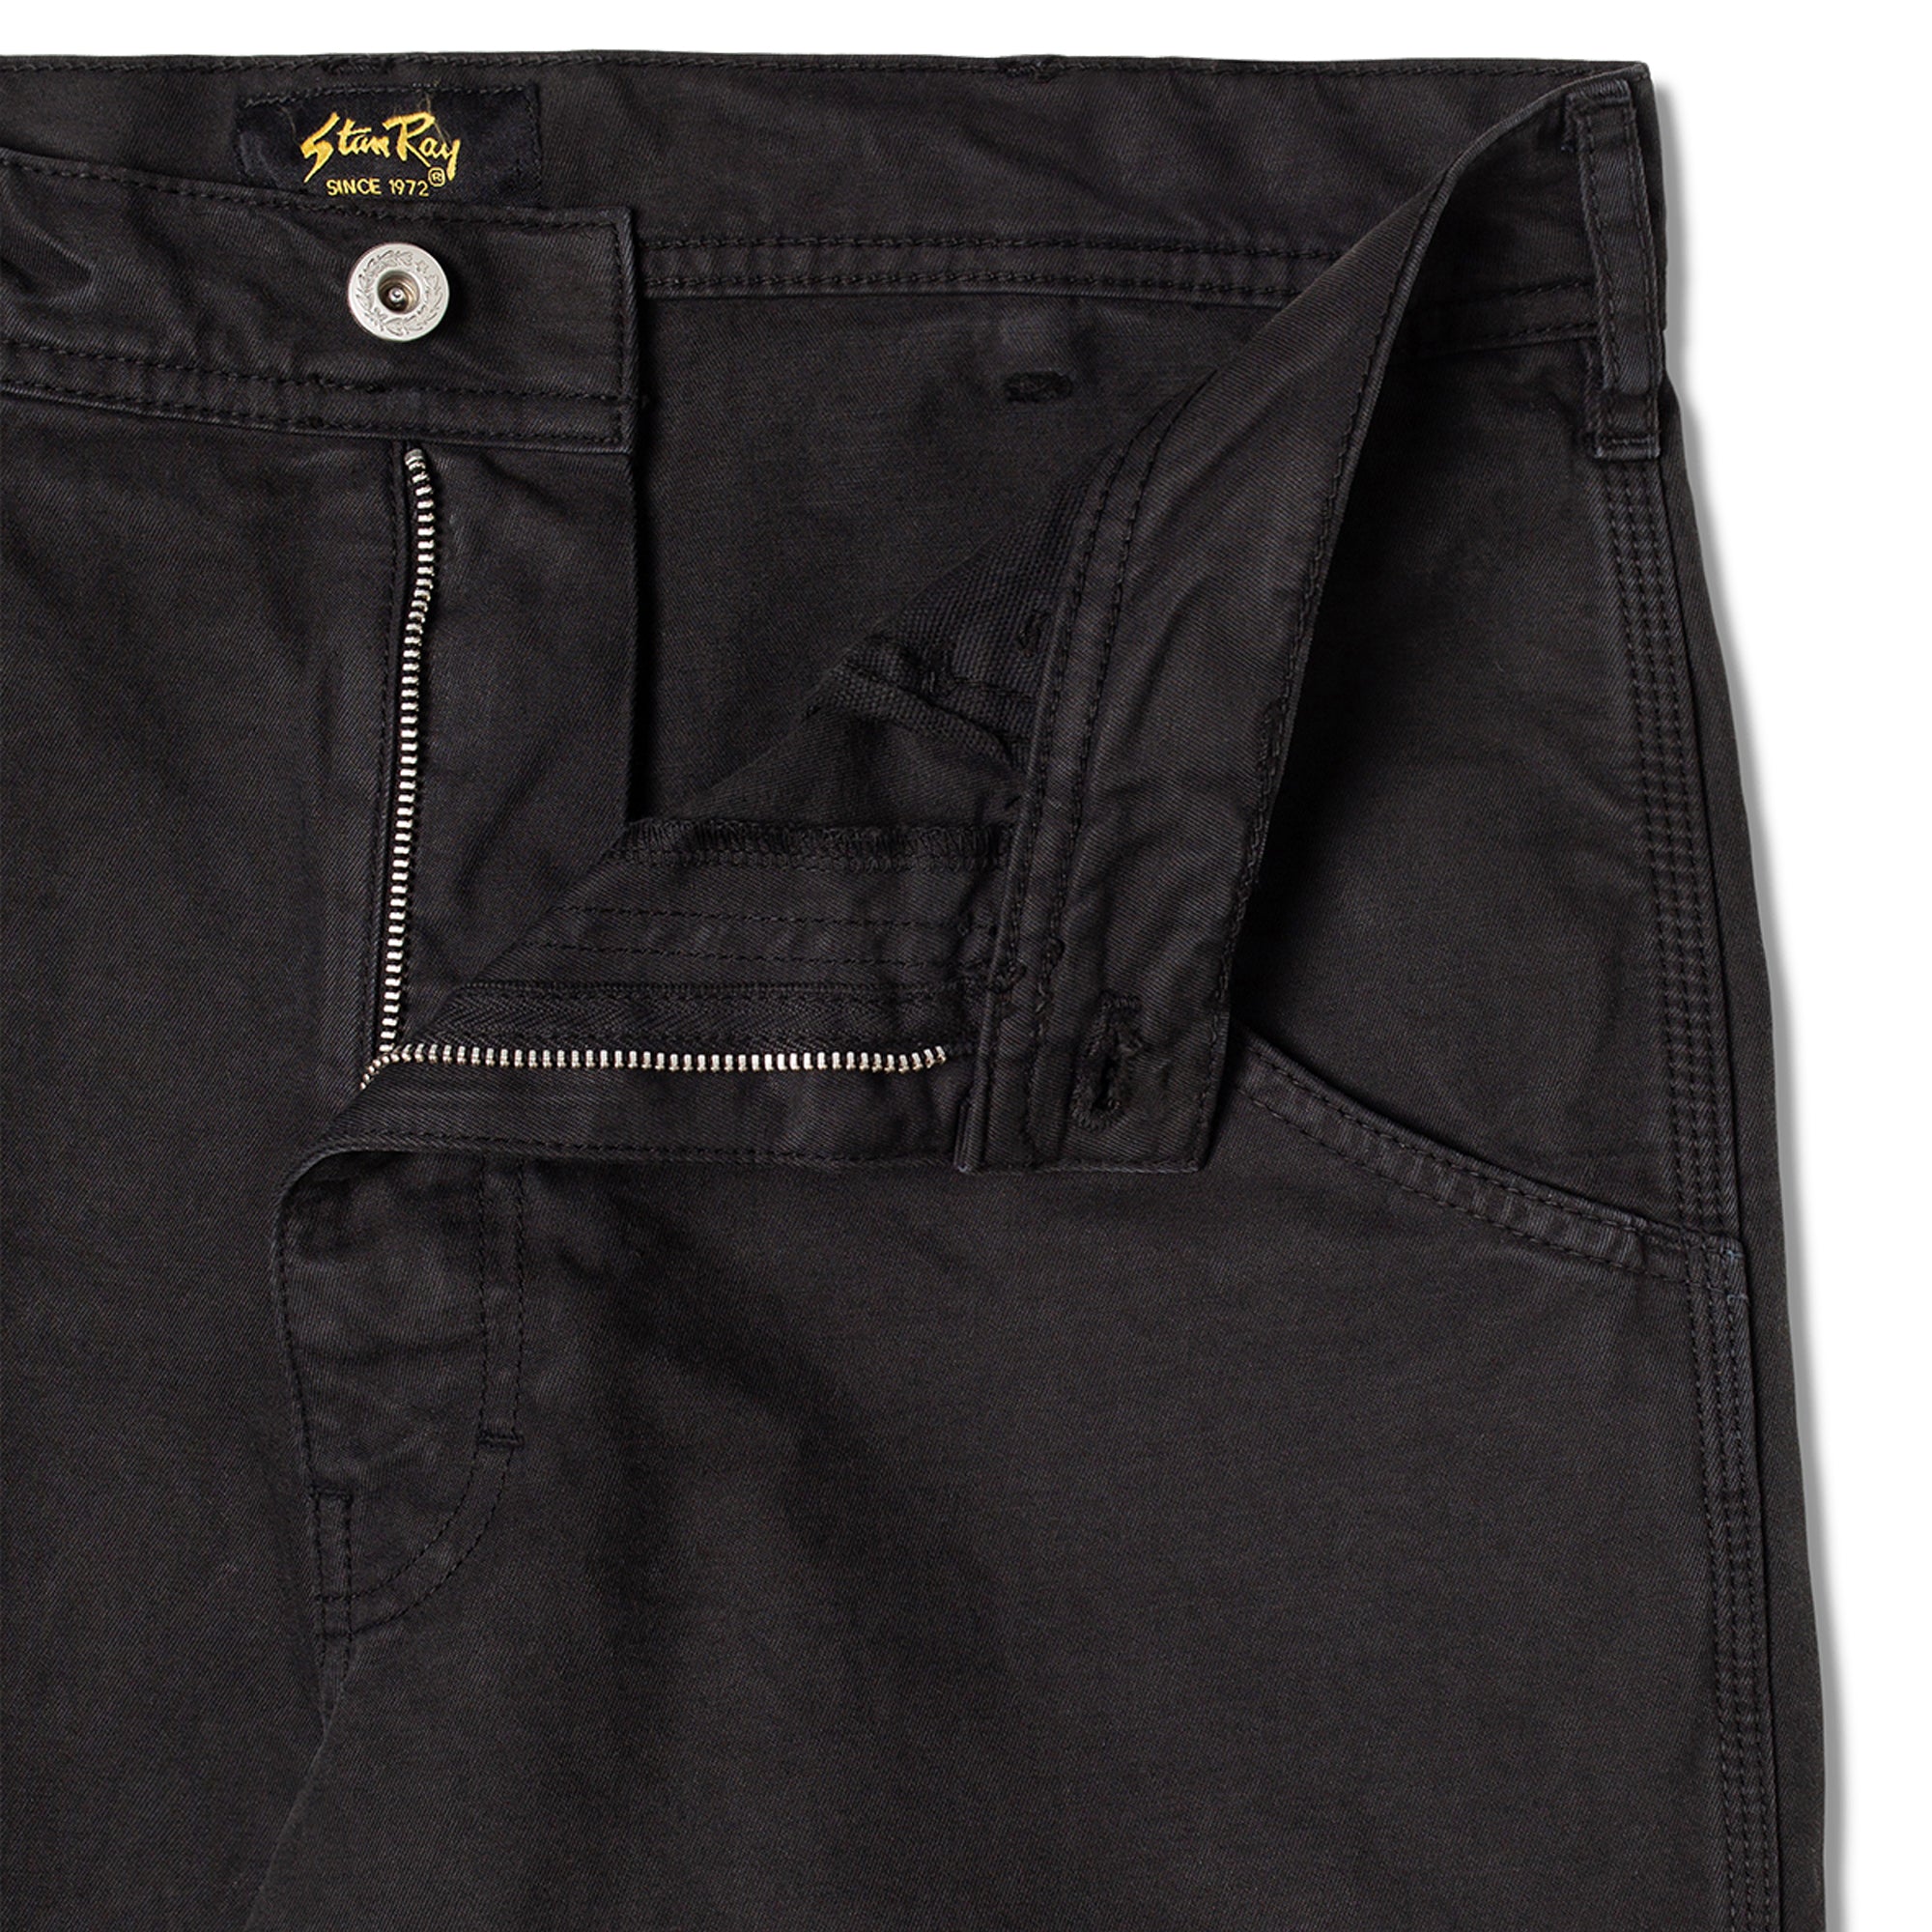 Stan Ray 80s Painter Pant - Black Twill